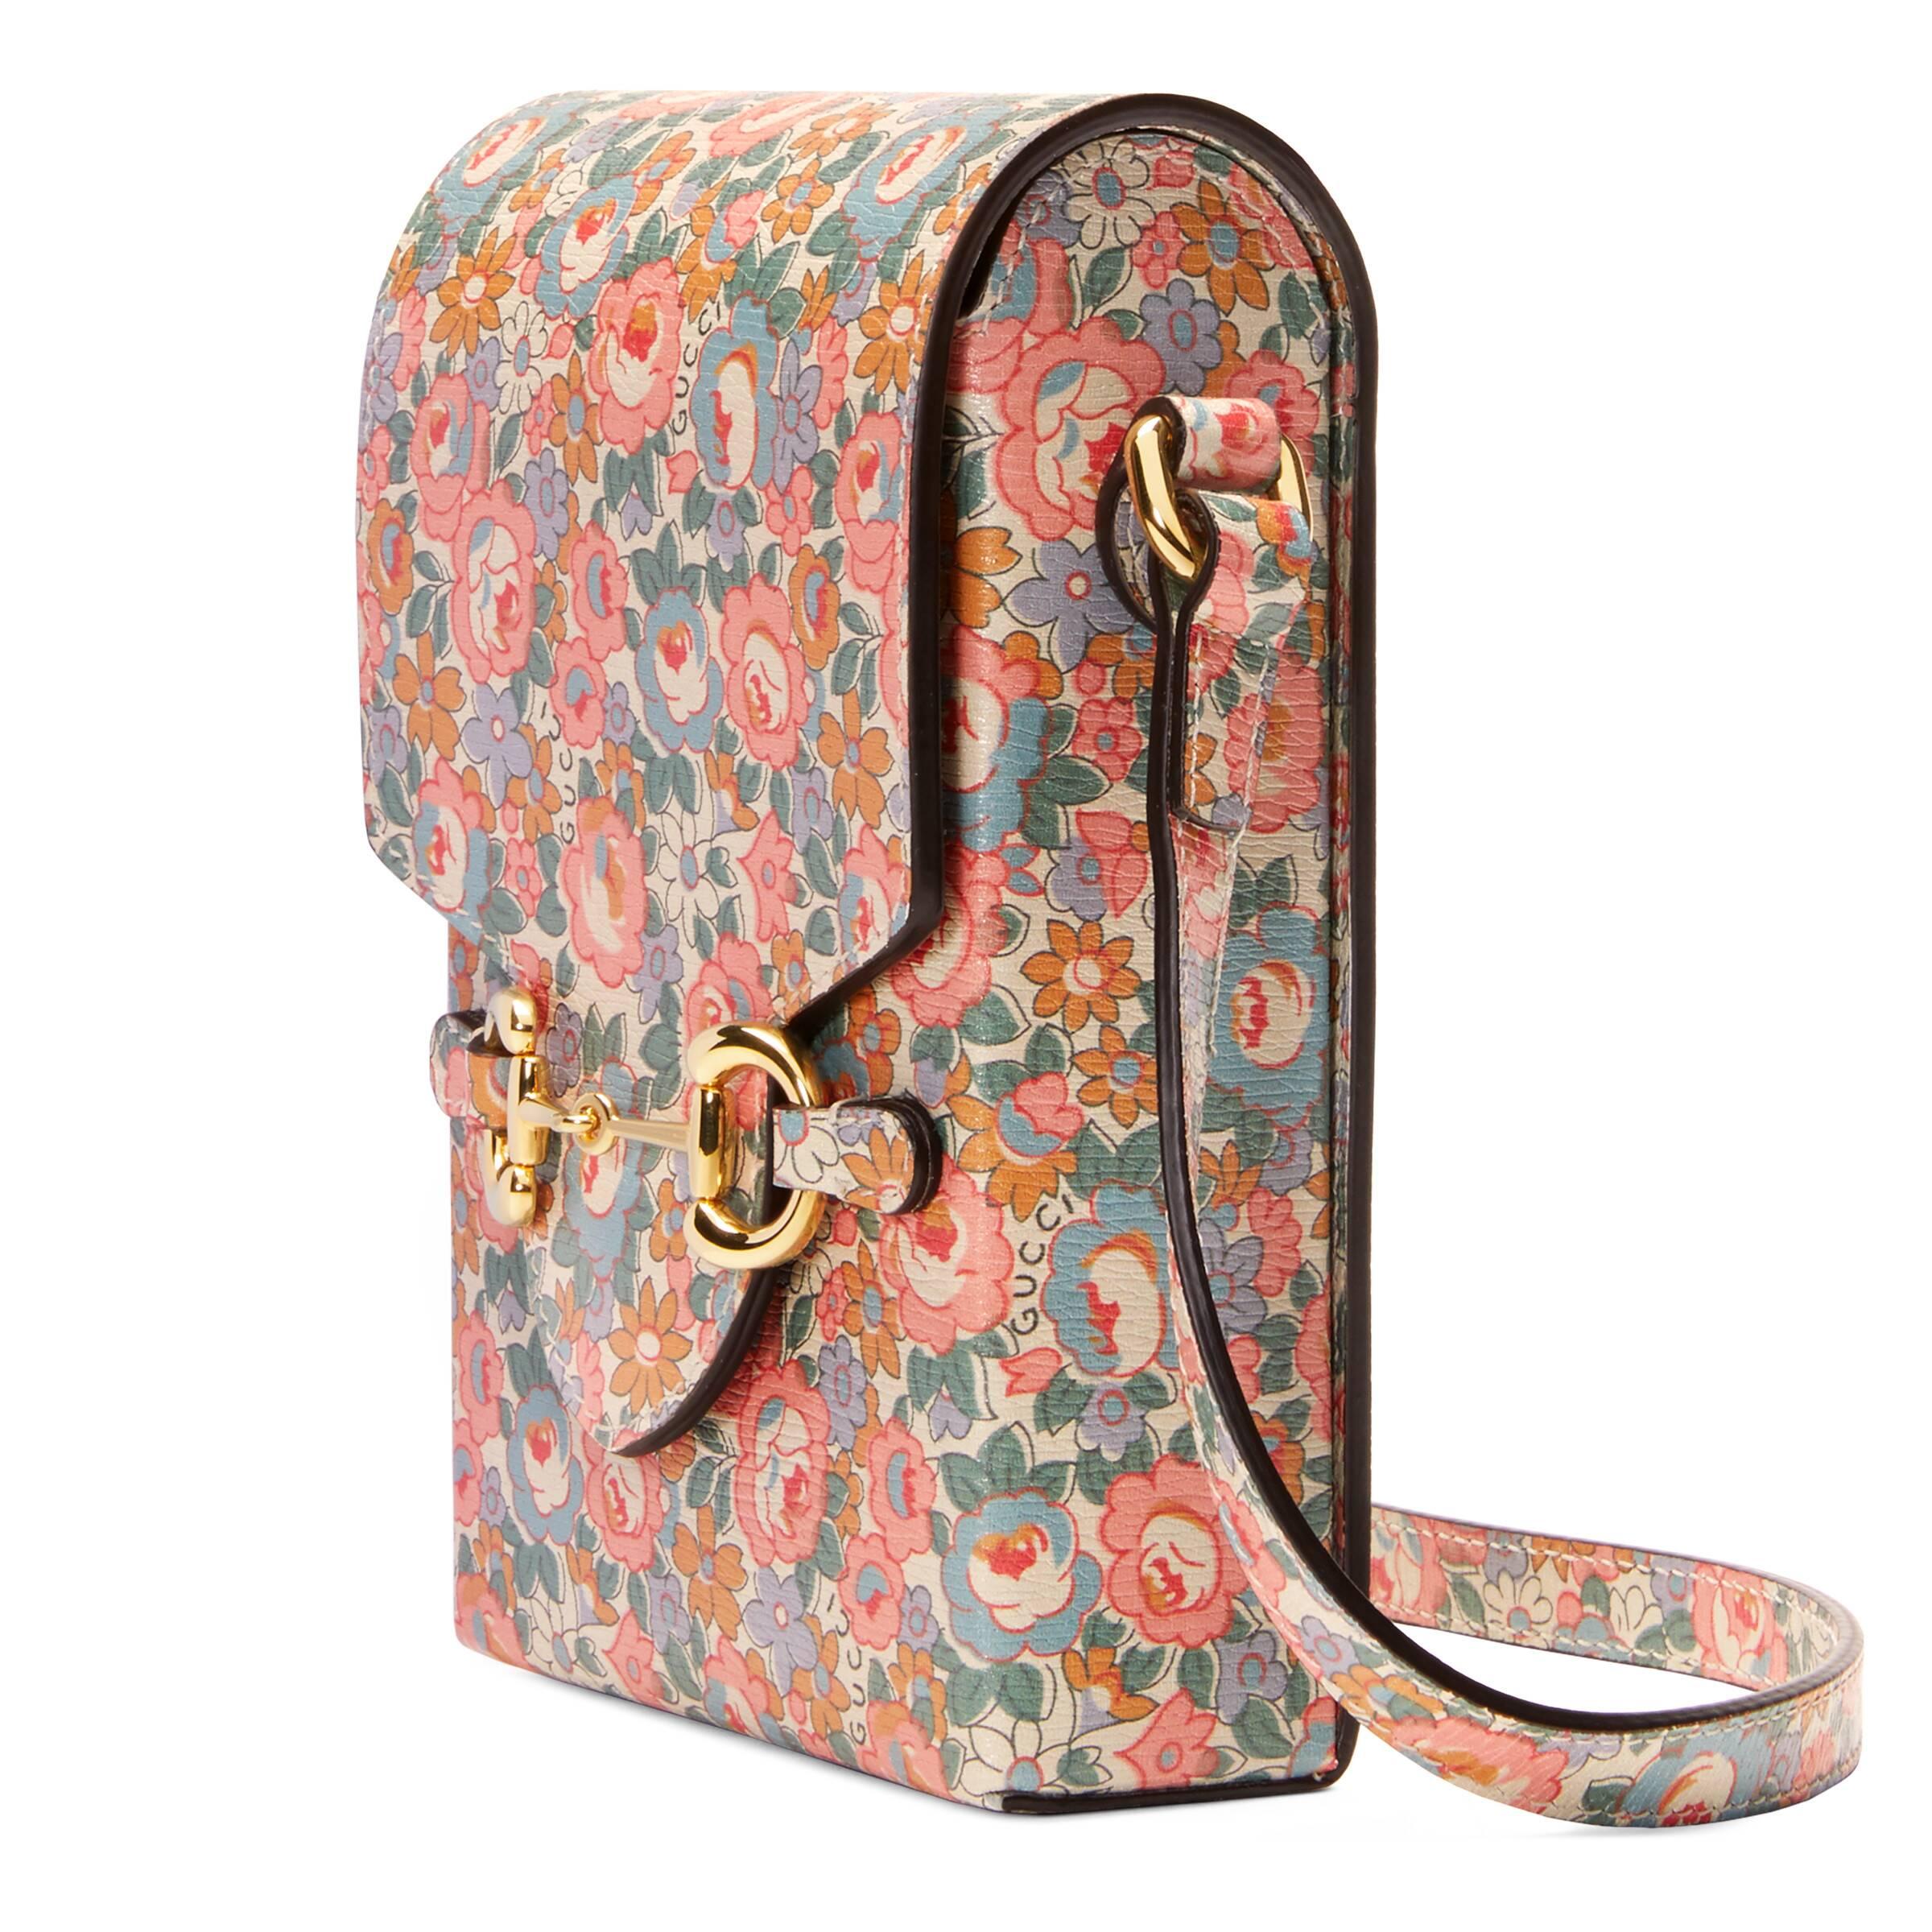 Gucci Leather Liberty Floral Mini Bag in Pink for Men - Lyst